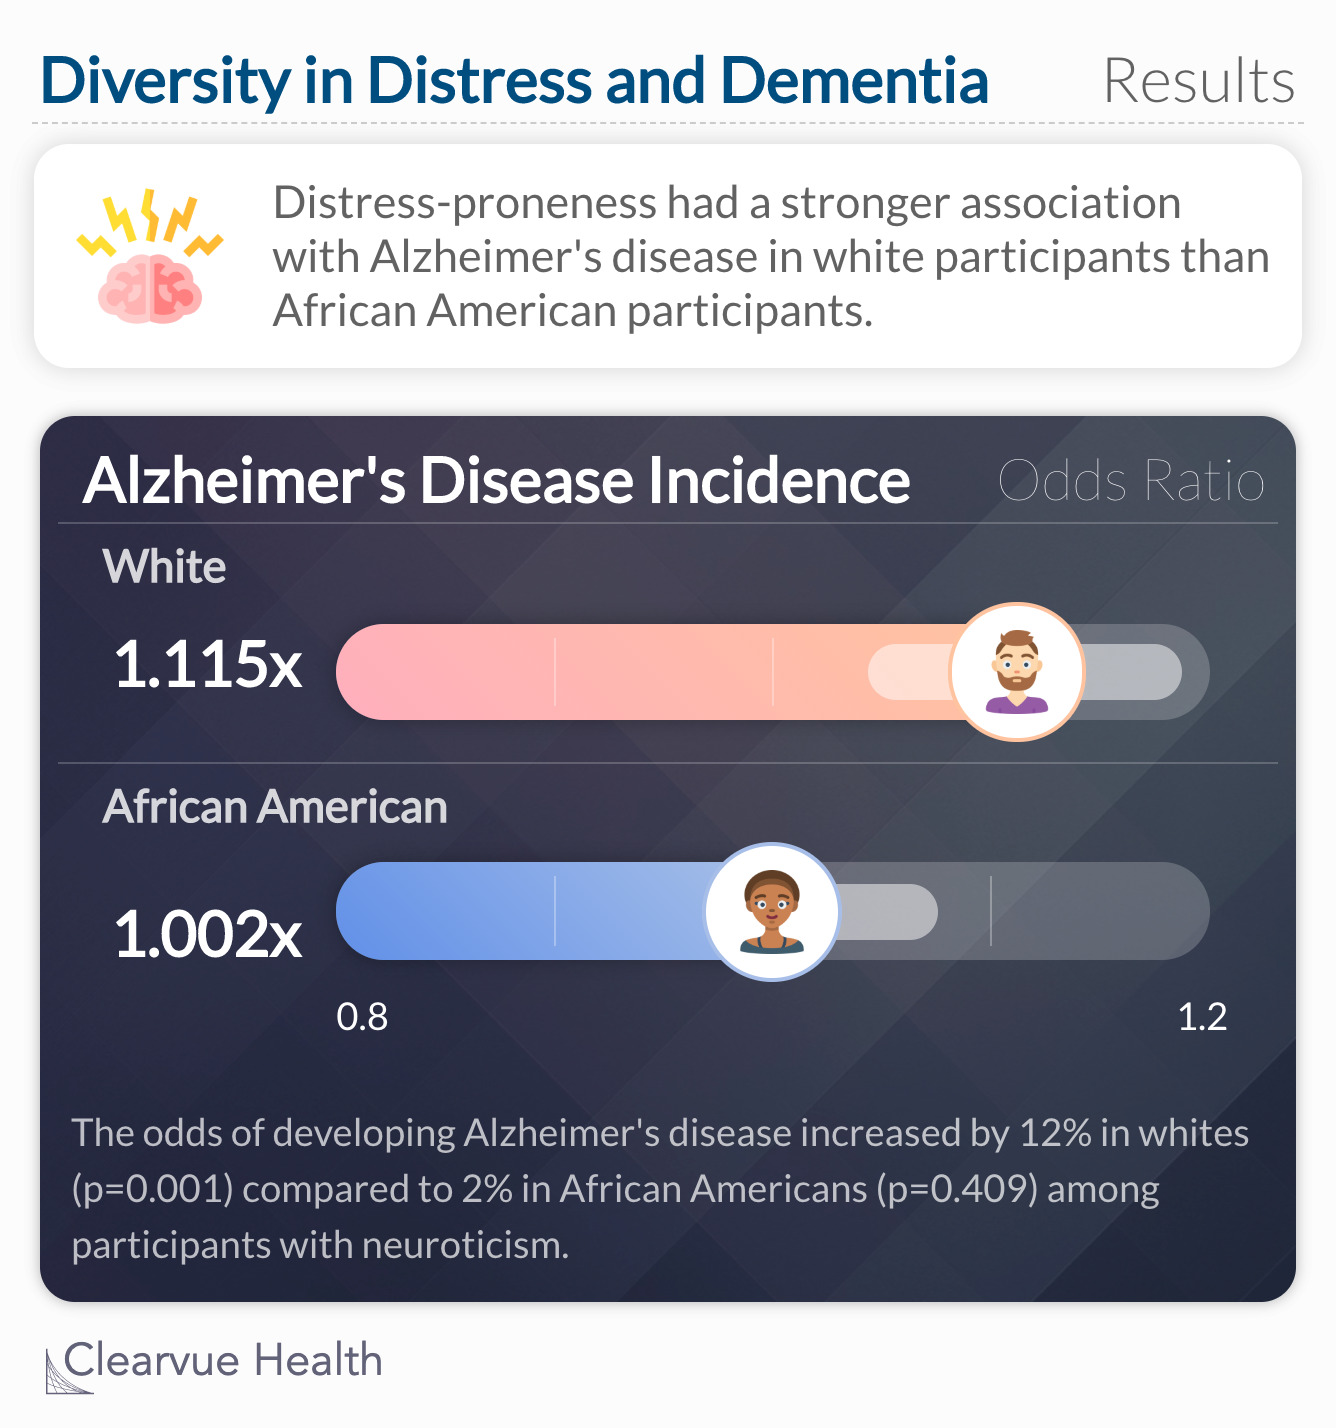 The odds of developing Alzheimer's disease increased by 12% in whites (p=0.001) compared to 2% in African Americans (p=0.409) among participants with neuroticism. 